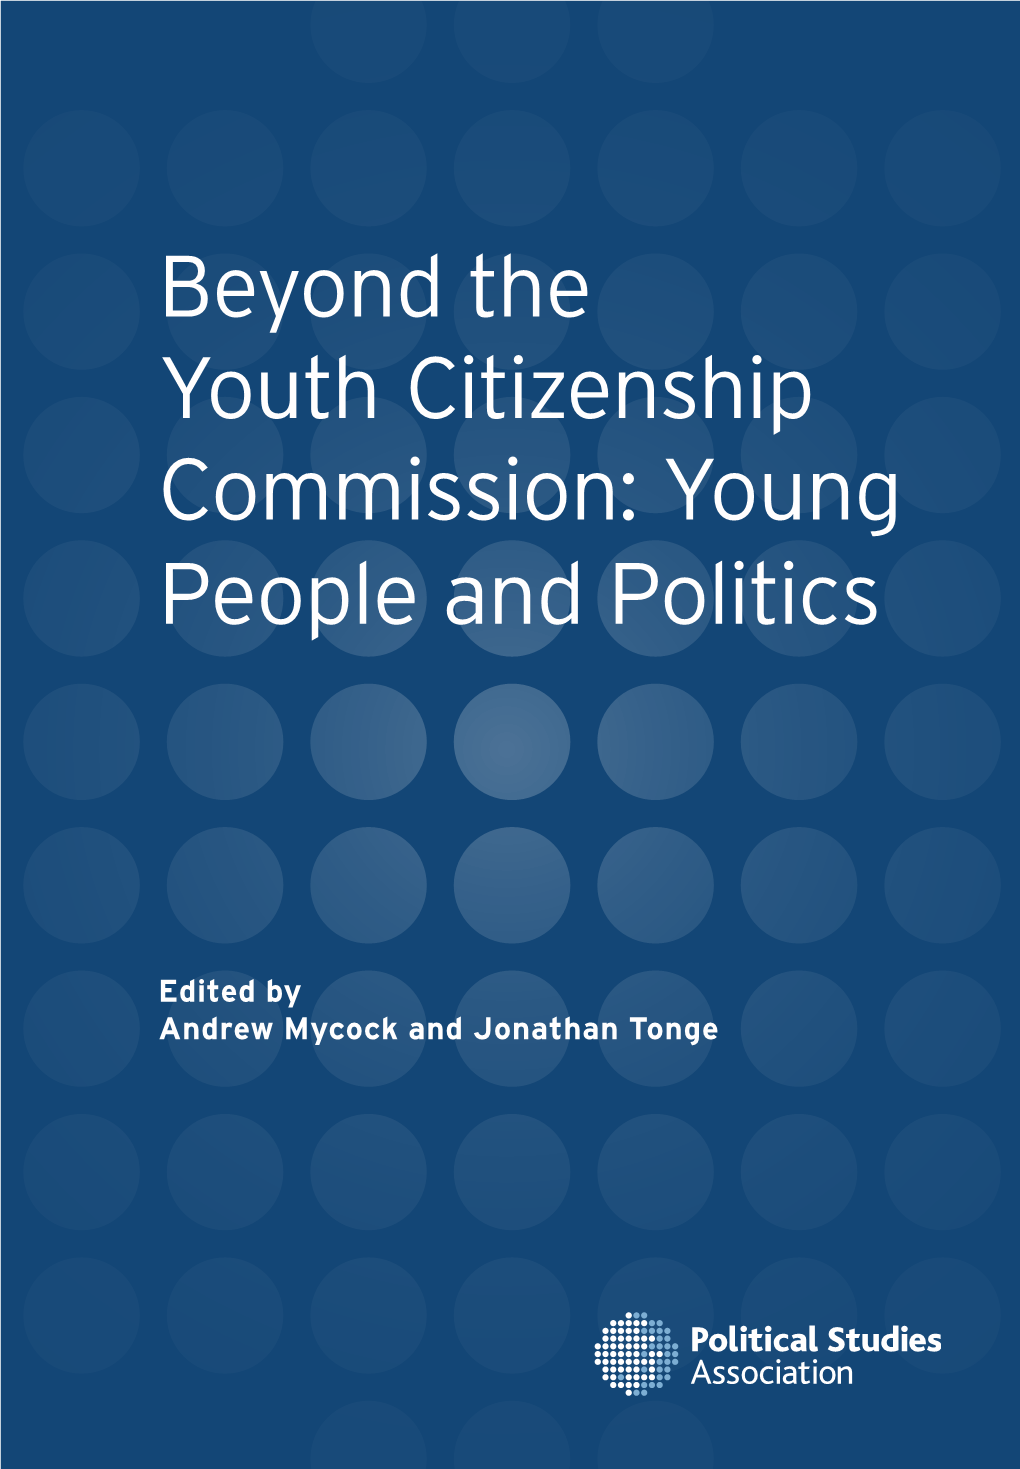 Beyond the Youth Citizenship Commission: Young People and Politics